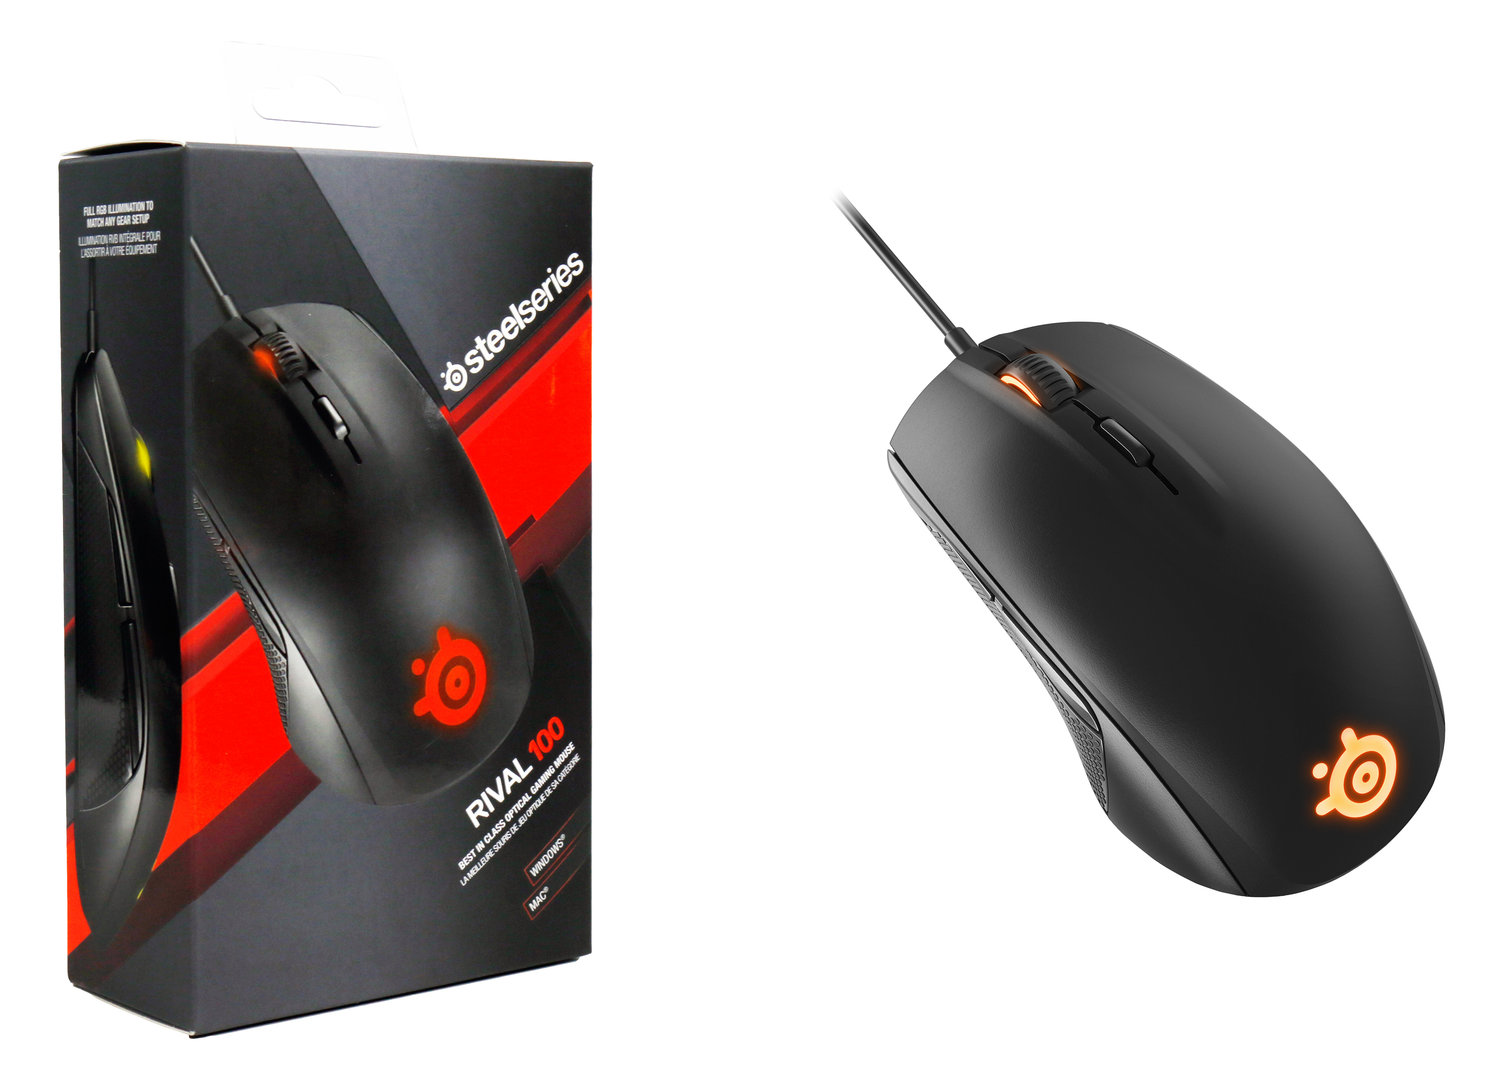 SteelSeries Rival 100 Optical Gaming Mouse (zwart) (PC), SteelSeries